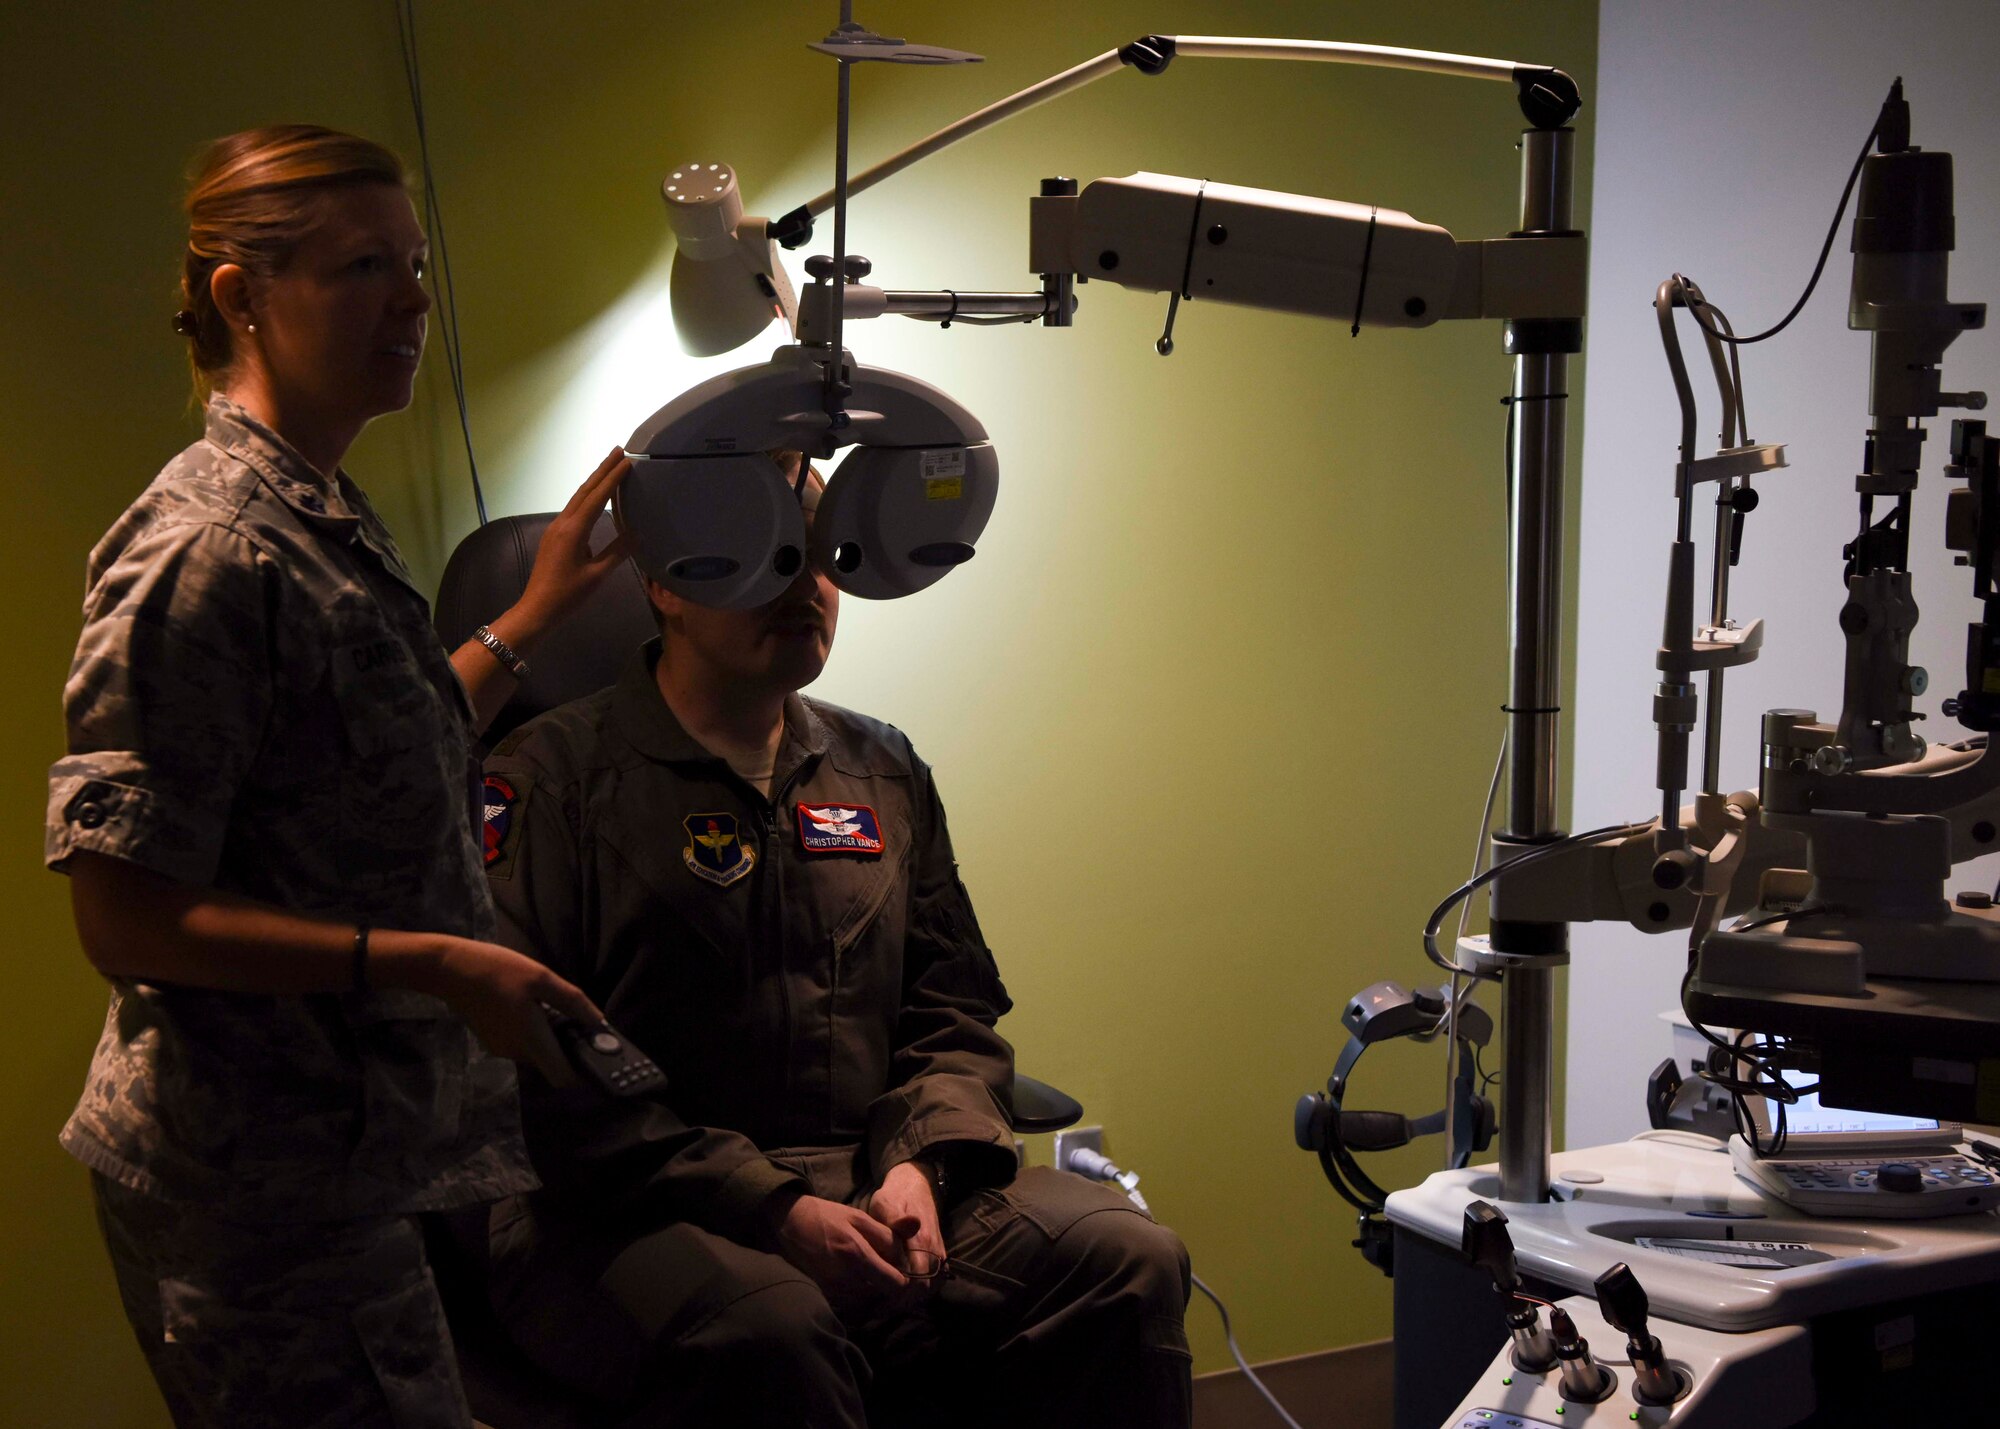 U.S. Air Force Lt. Col. Jennifer Carver, 49th Medical Group optometrist, conducts a vision exam for Maj. Christopher Vance, 9th Attack Squadron instructor pilot, at Holloman Air Force Base, N.M., Jan. 23, 2019. The 49th MDG Optometry Clinic’s primary mission is to perform annual eye exams for the base community, as well as screenings for diabetics and fittings for glasses and contact lenses. (U.S. Air Force photo by Staff Sgt. BreeAnn Sachs)